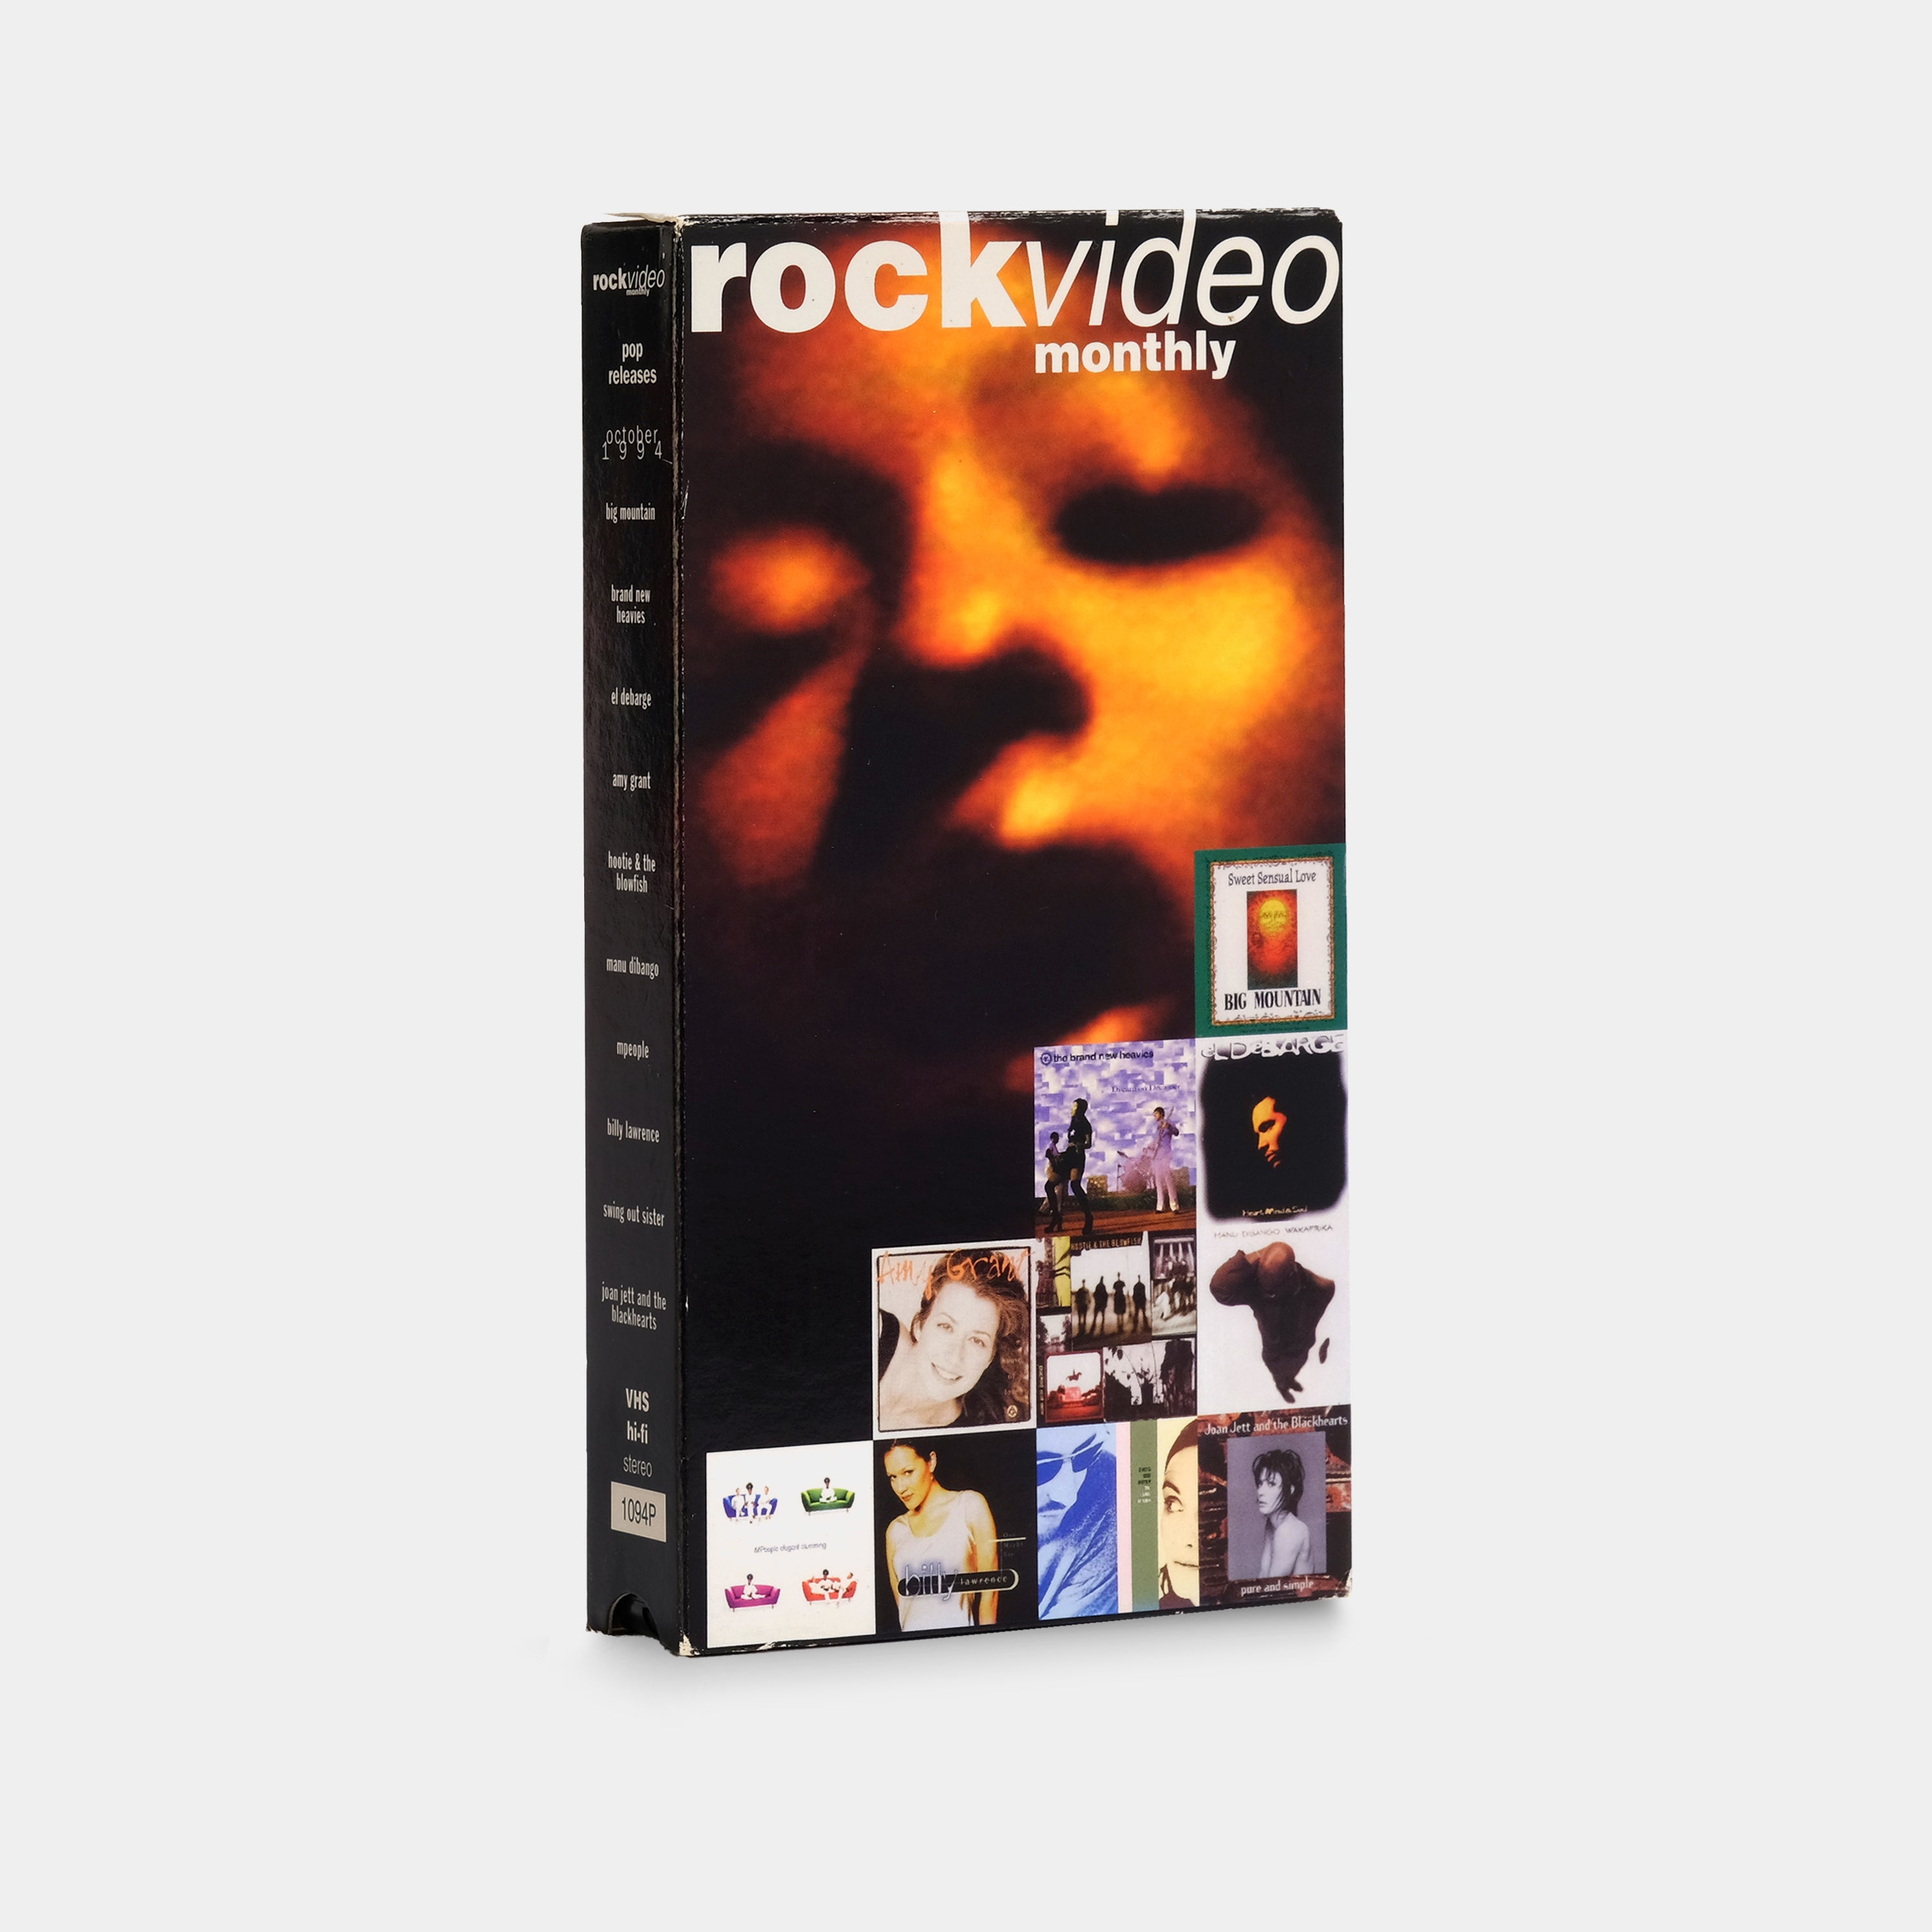 RockVideo Monthly - Pop Releases October 1994 VHS Tape